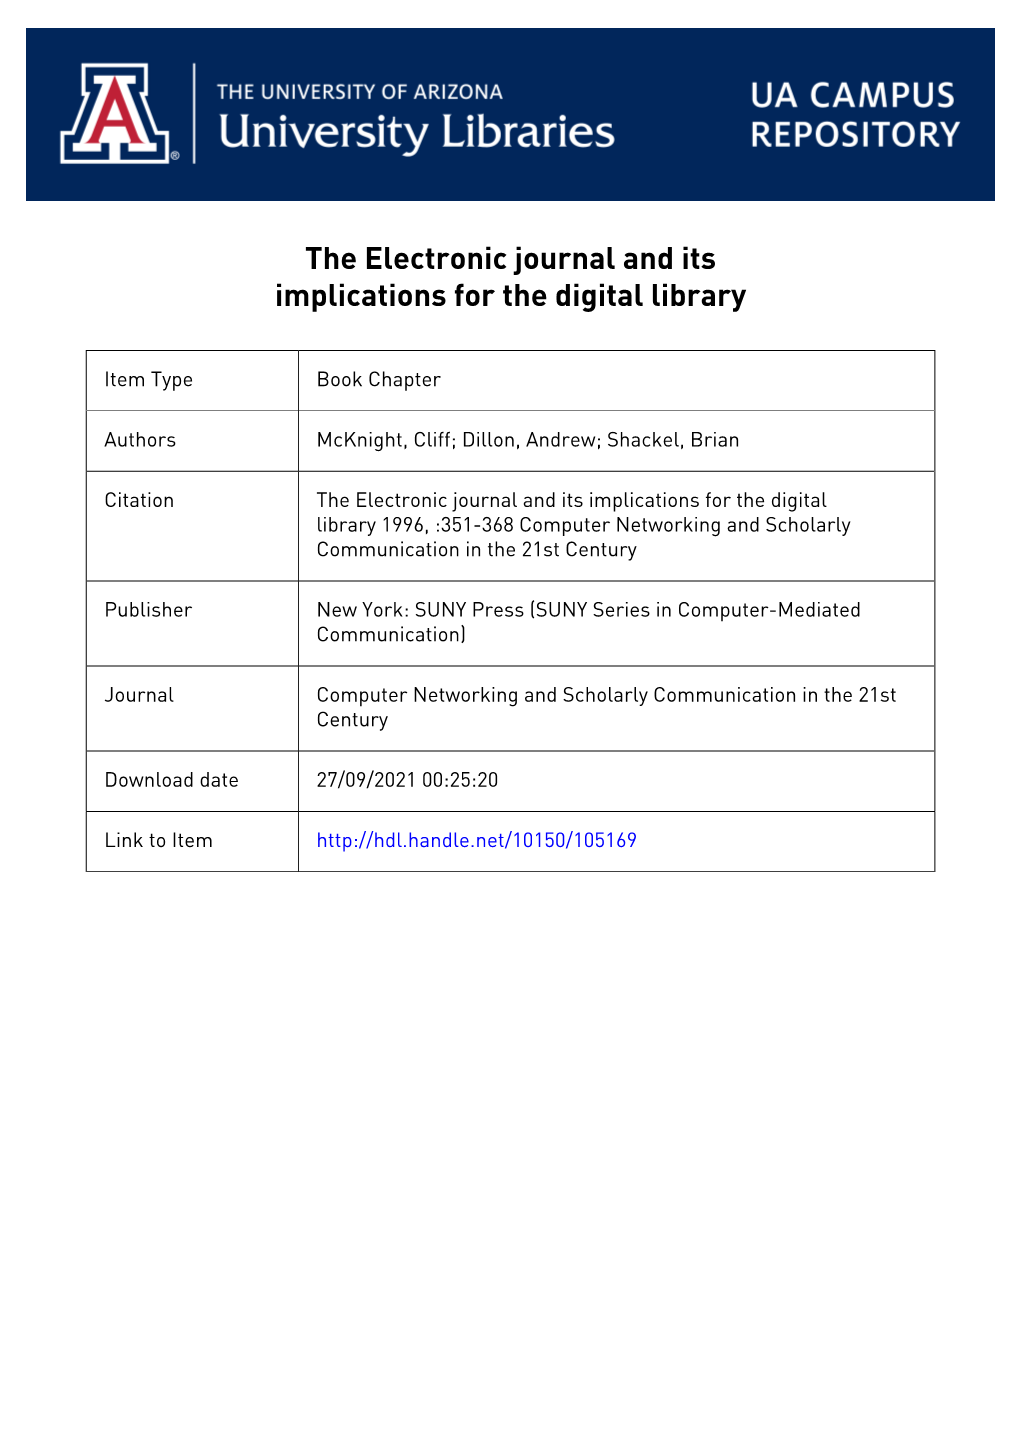 The Electronic Journal and Its Implications for the Electronic Library